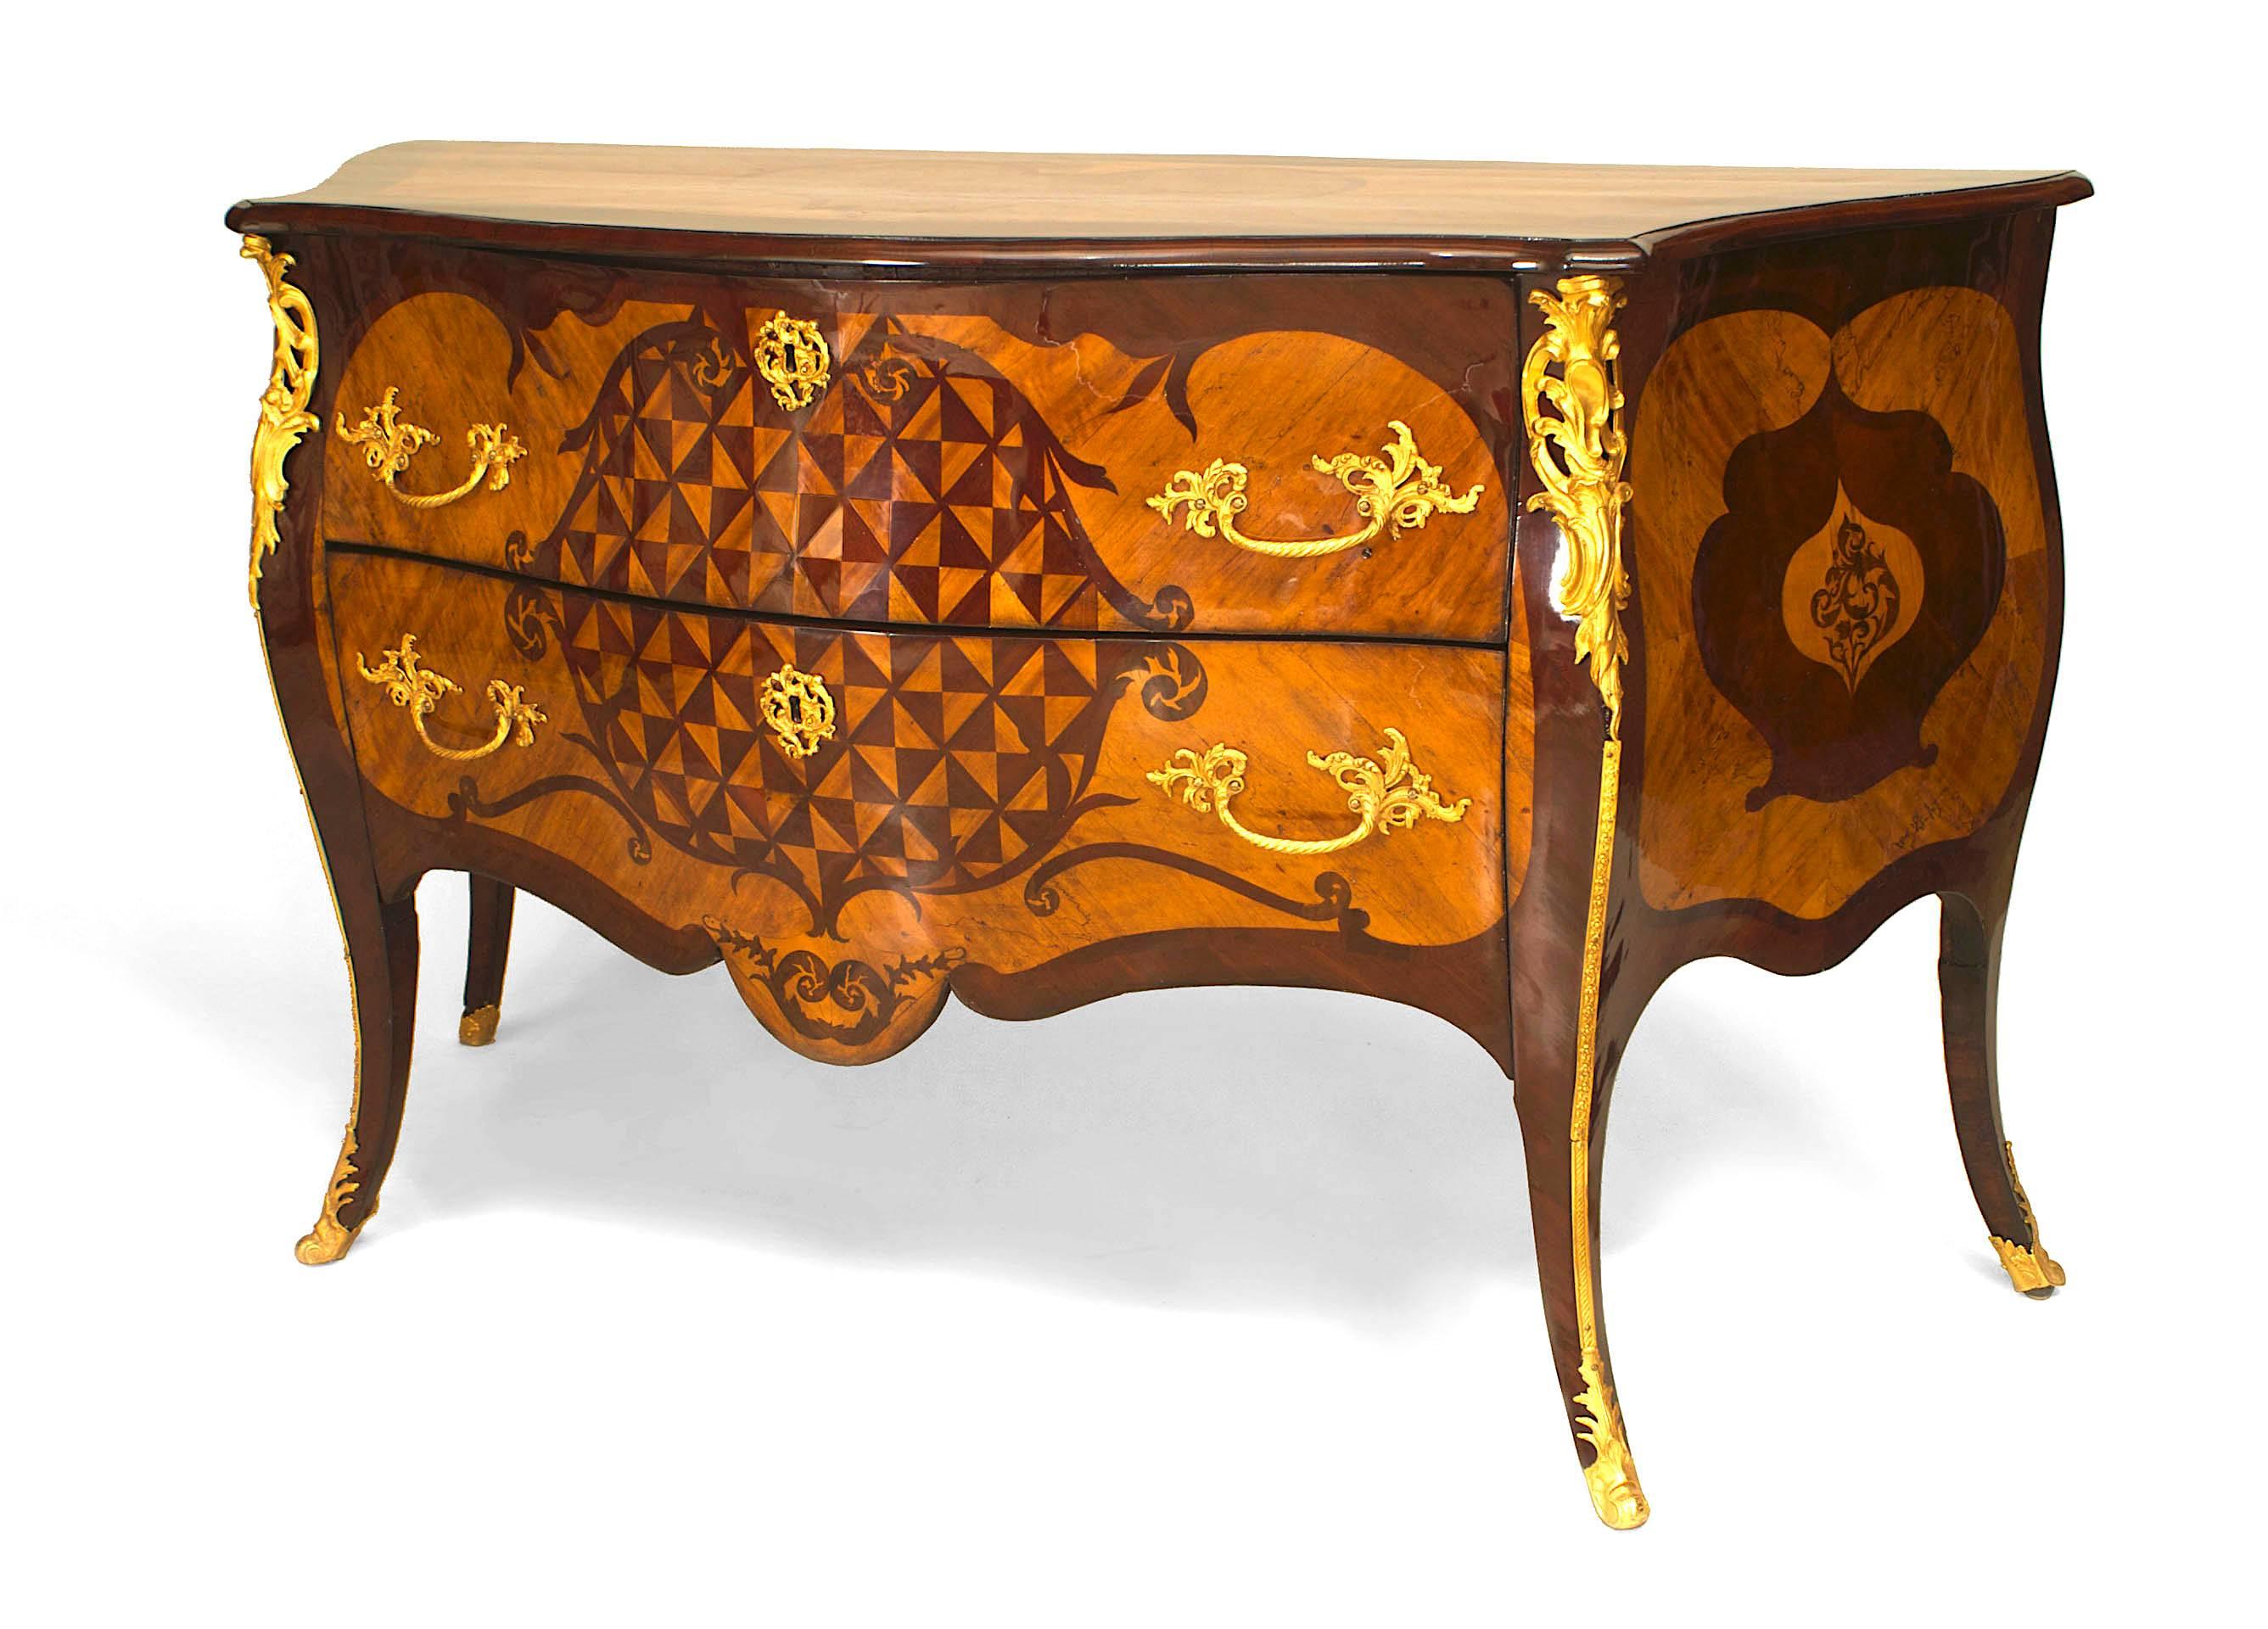 Continental (probably Dutch, circa 1750) Rococo gilt bronze trimmed mahogany and fruitwood 2 drawer commode with parquetry and marquetry inlaid design.
